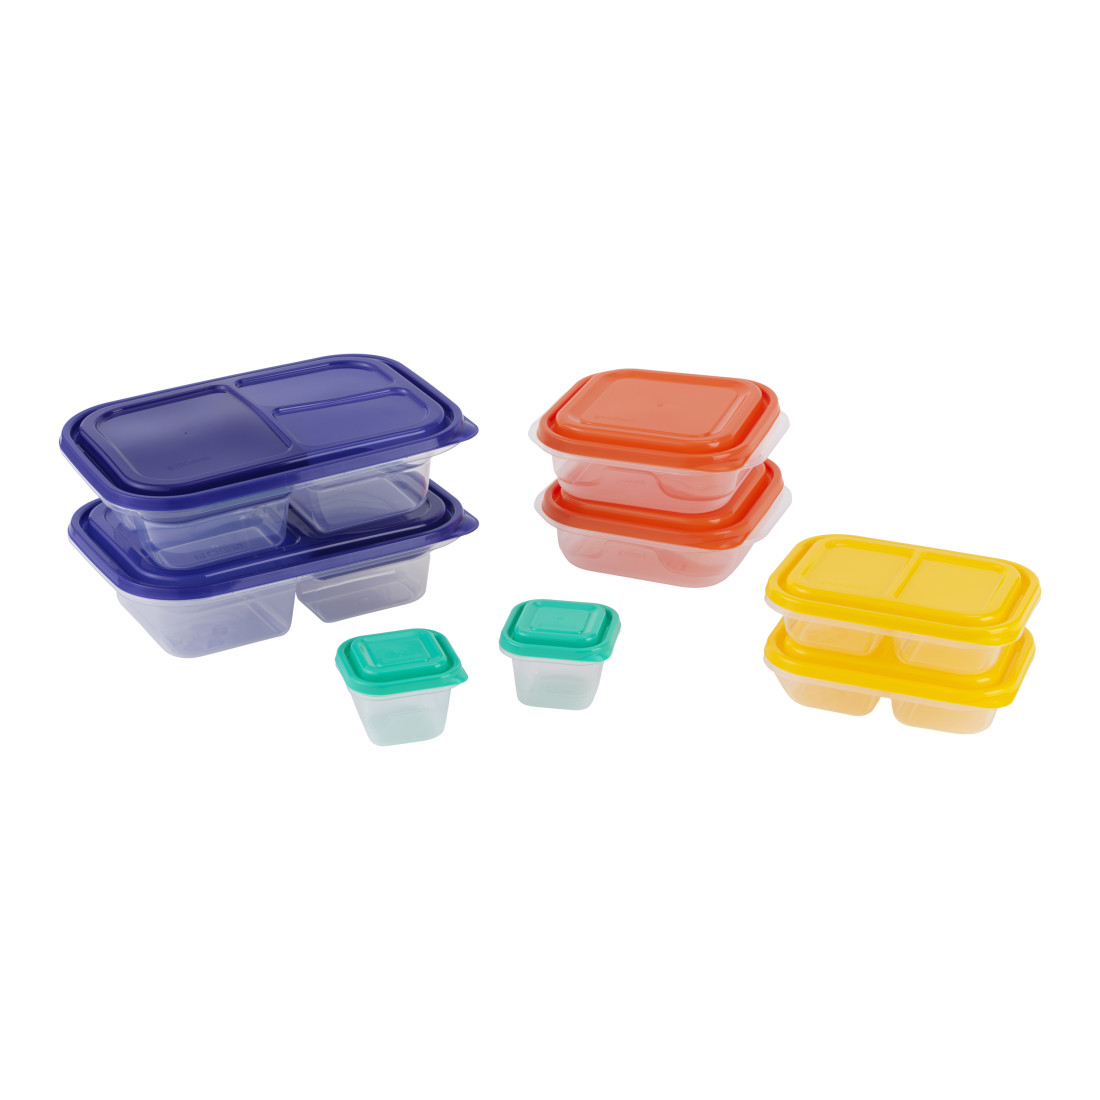 BRAND NEW RUBBERMAID LUNCH BLOX SET - LARGE ENTREE KIT